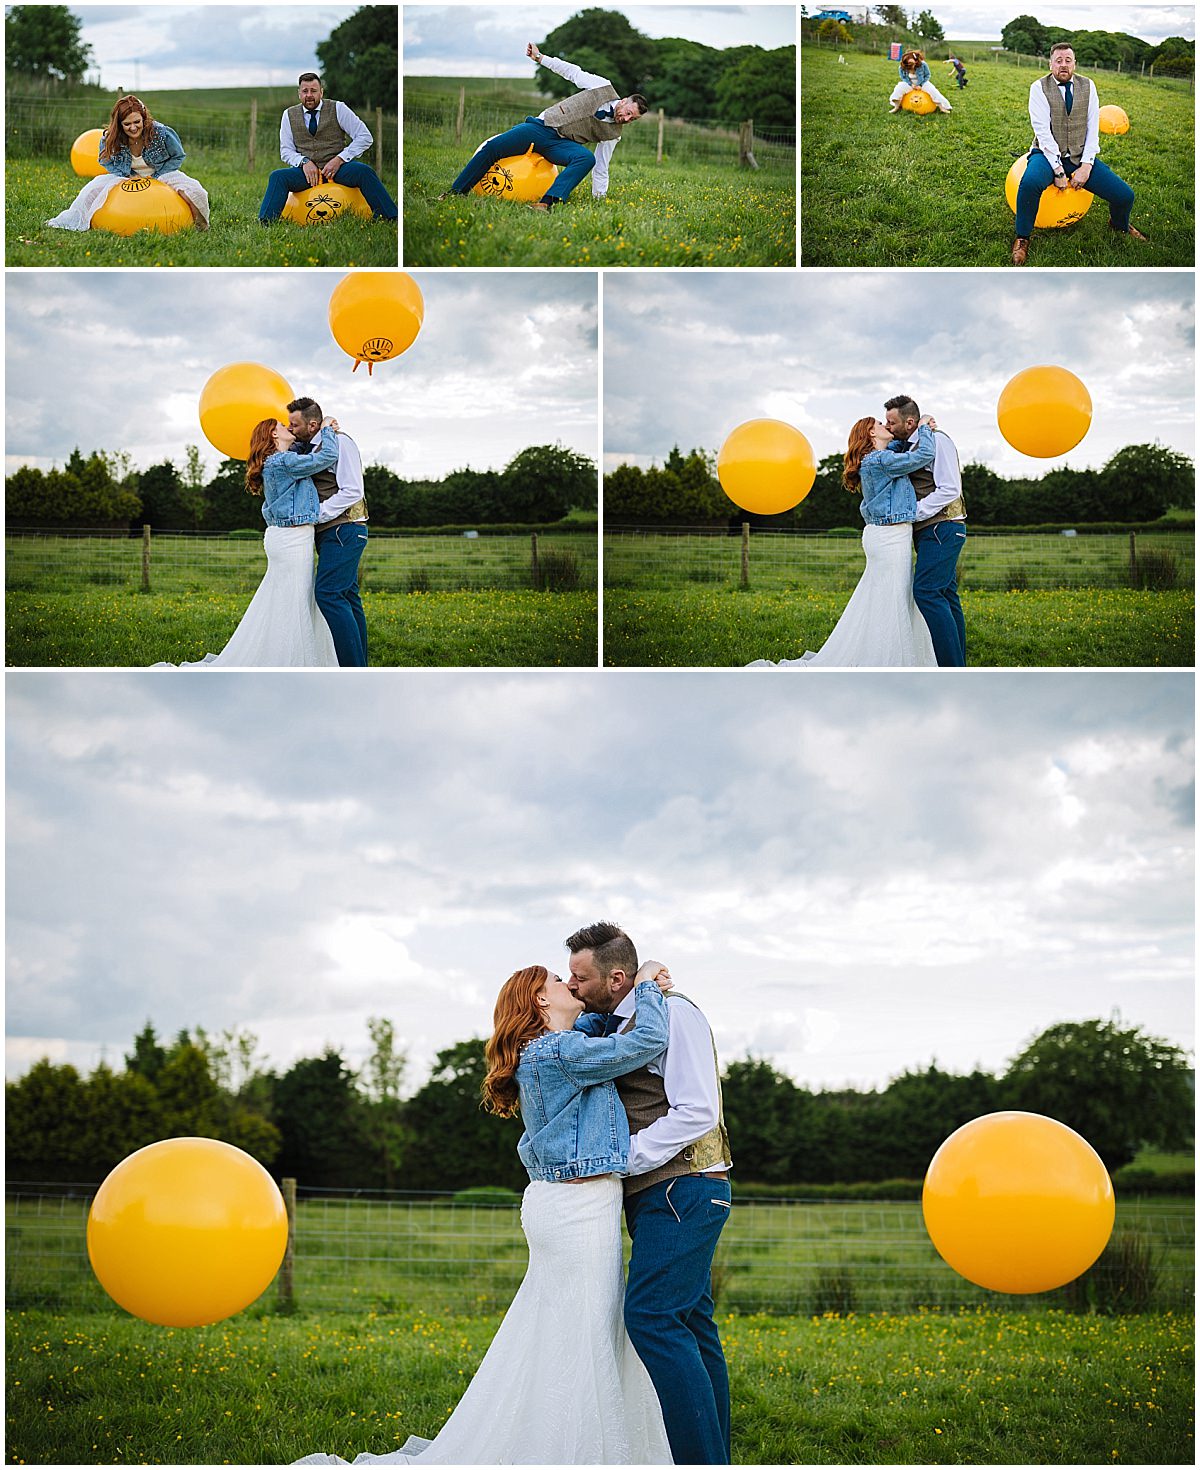 fun and relaxed wedding photography at the wellbeing farm